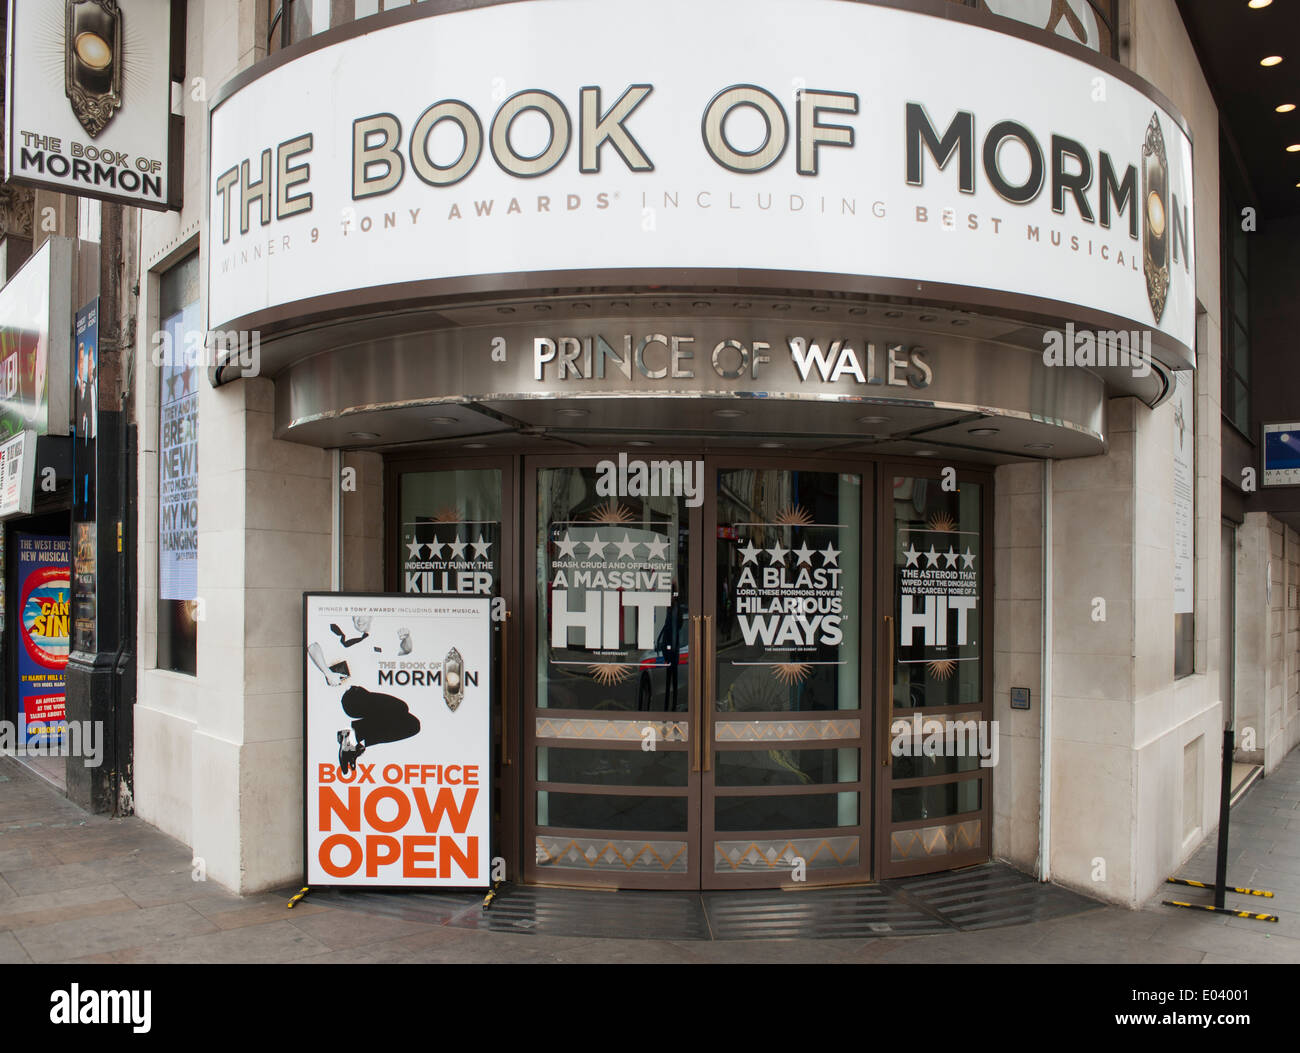 Prince of Wales Theatre, The Book of Mormon, London UK Stock Photo - Alamy